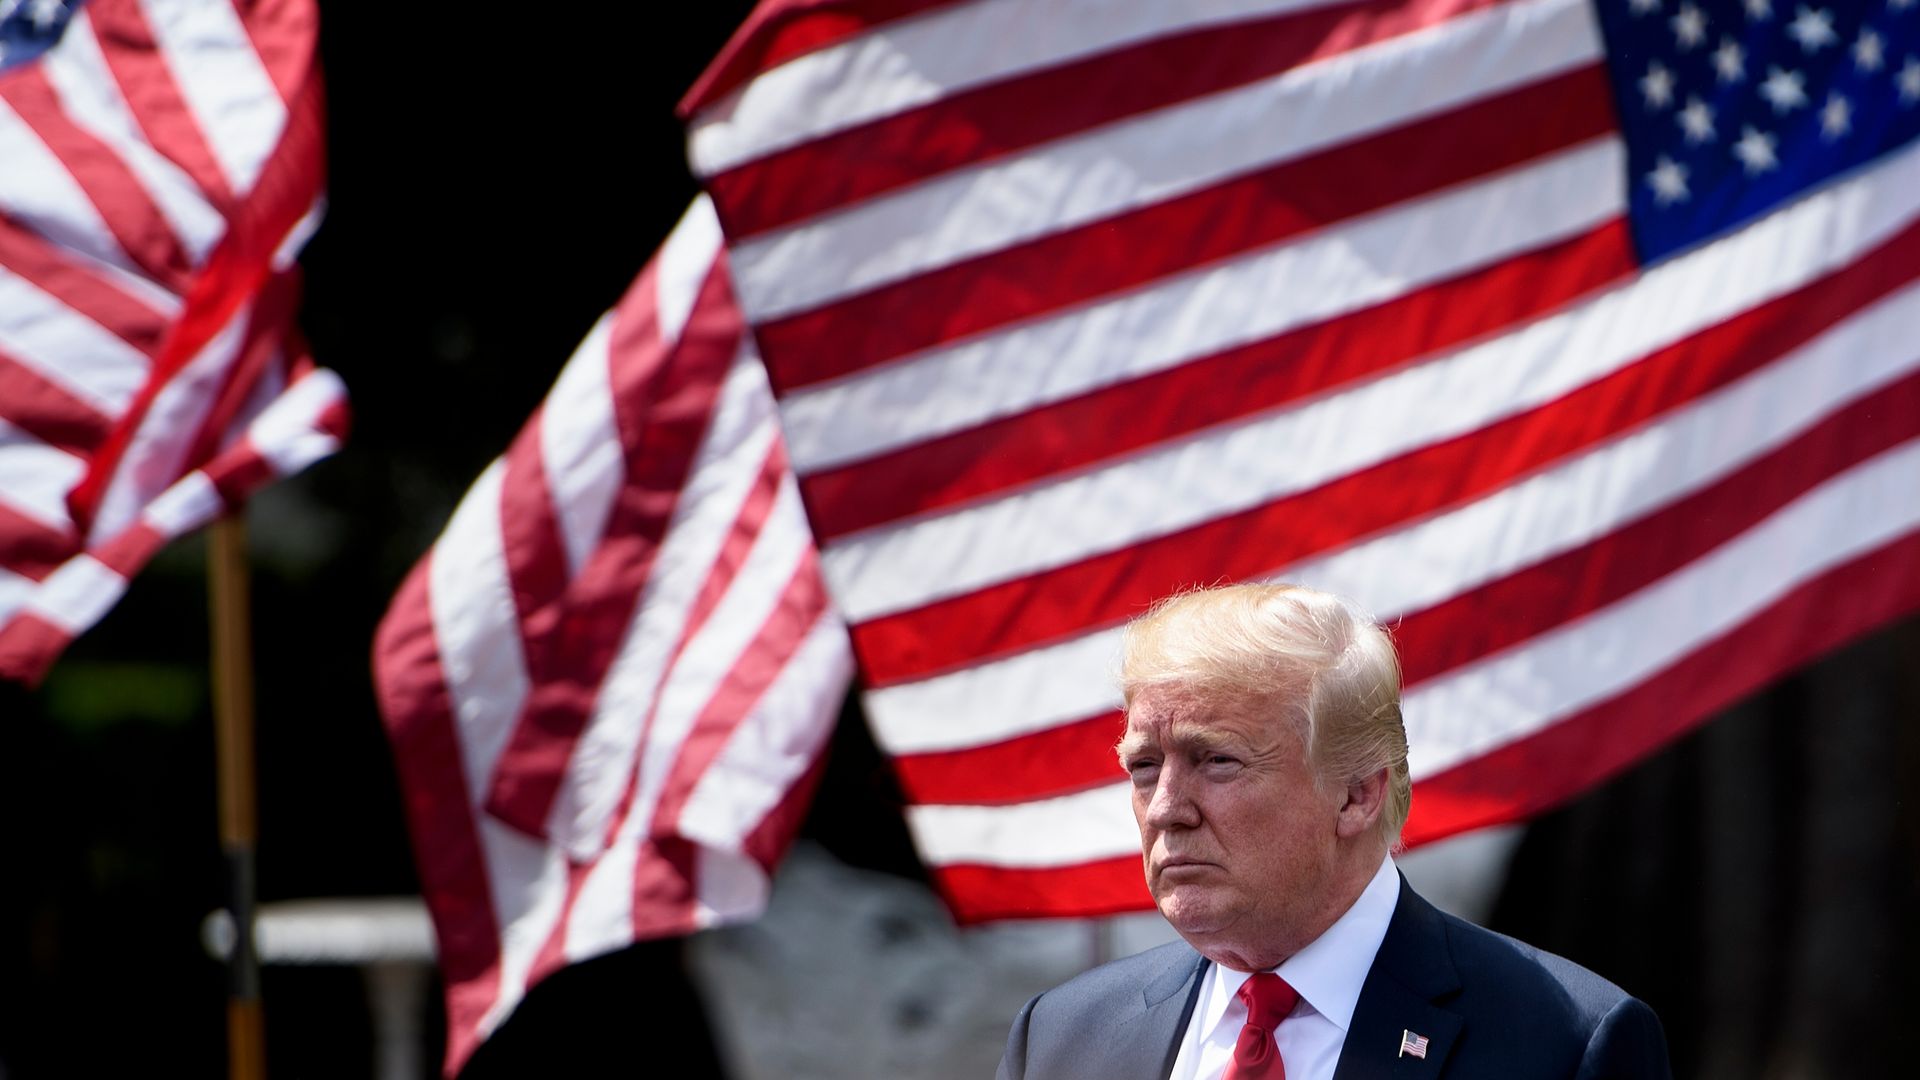 Donald Trump in front of American flags